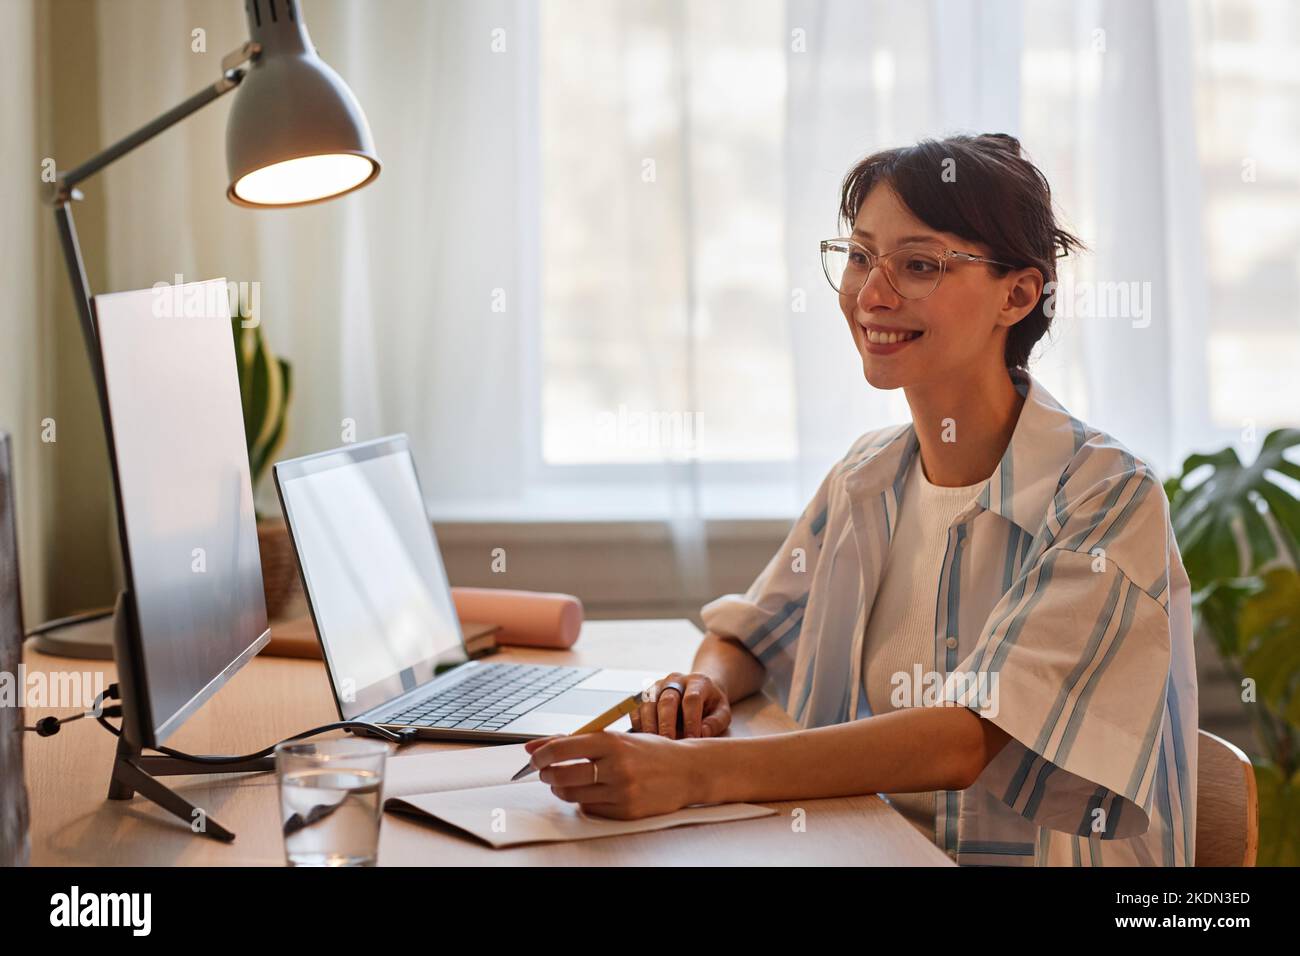 Portrait of smiling young woman enjoying online education class or work meeting at cozy home office workplace with dim lights Stock Photo